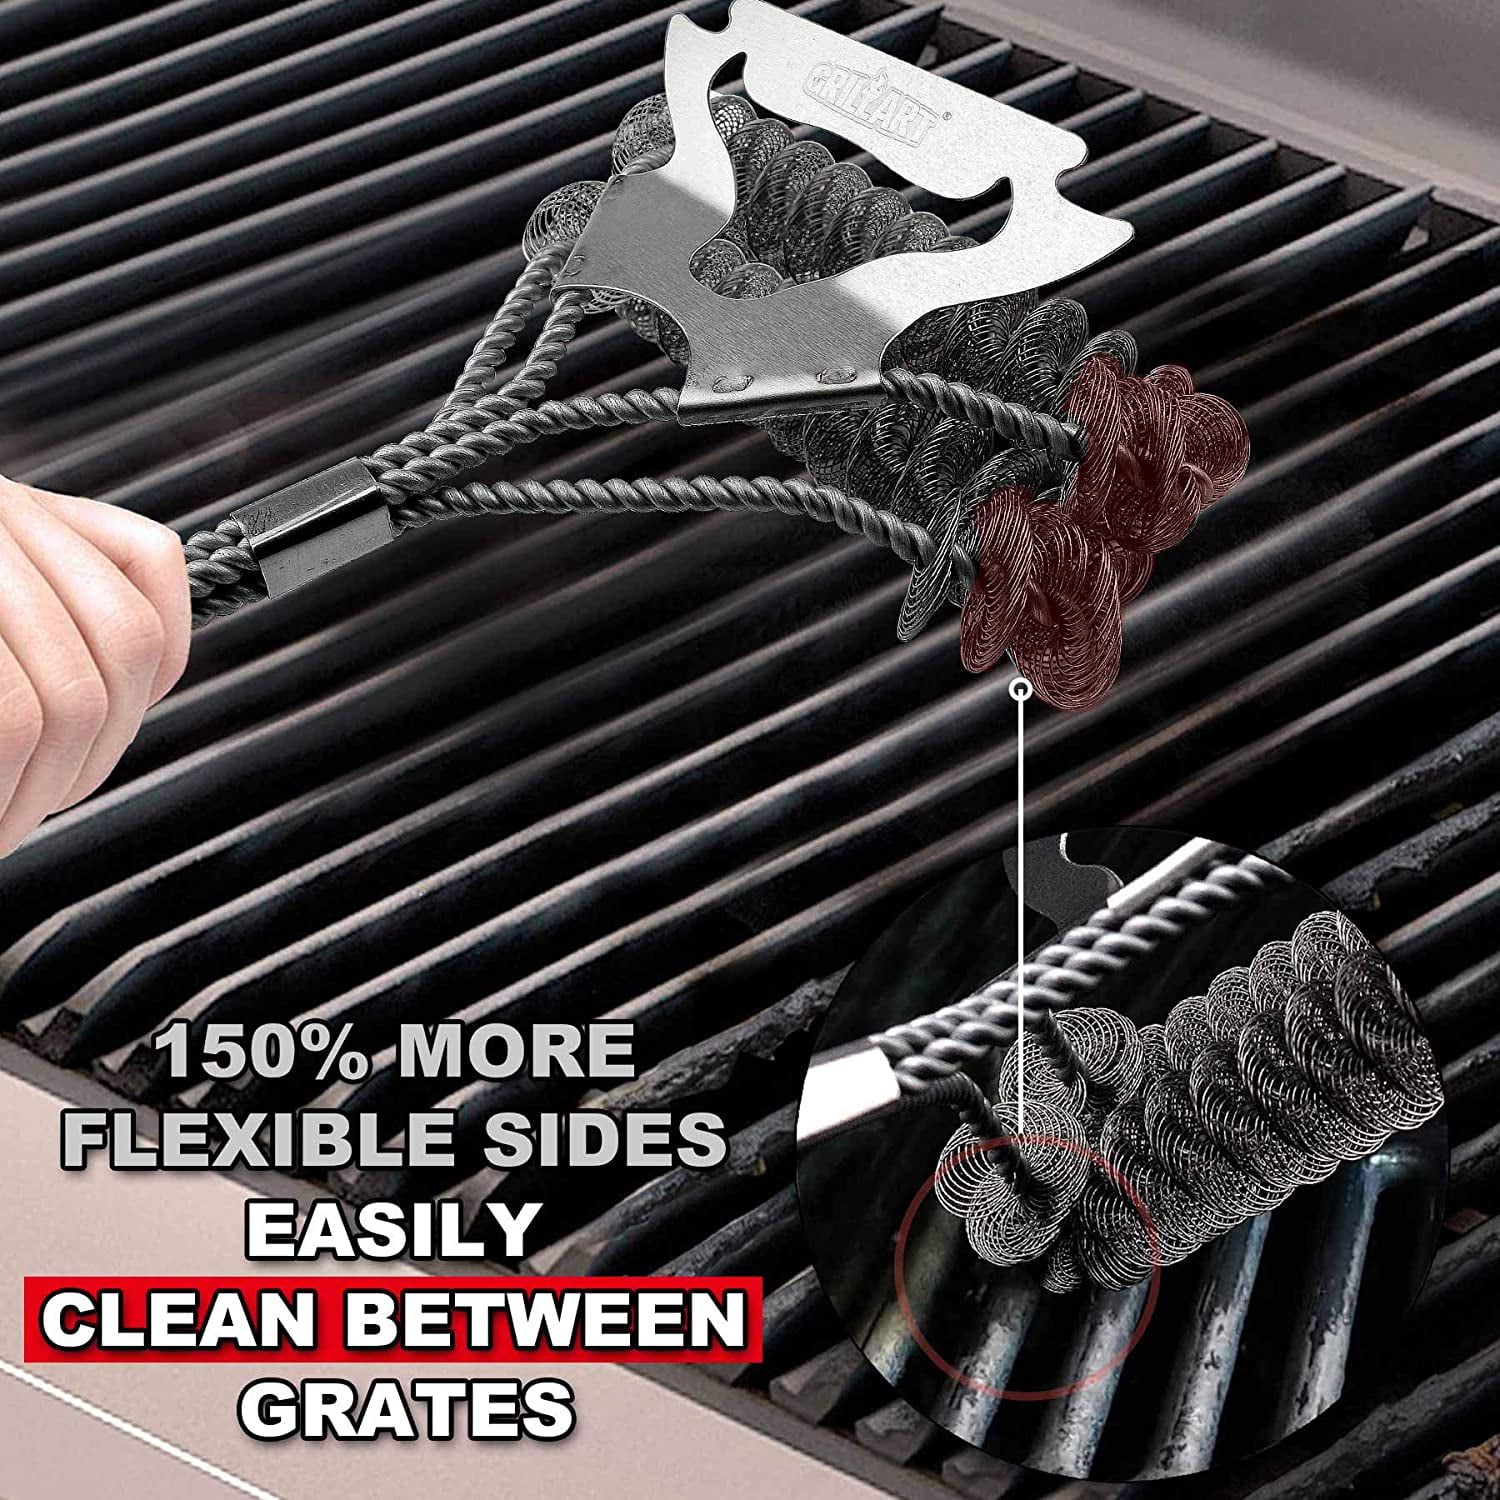 Tohsssik 2pcs Grill Brush for Outdoor Grill, Stainless Grill Cleaner Brush  and Scraper, 17 BBQ Brush for Grill Cleaning & Grill Brush Bristle Free